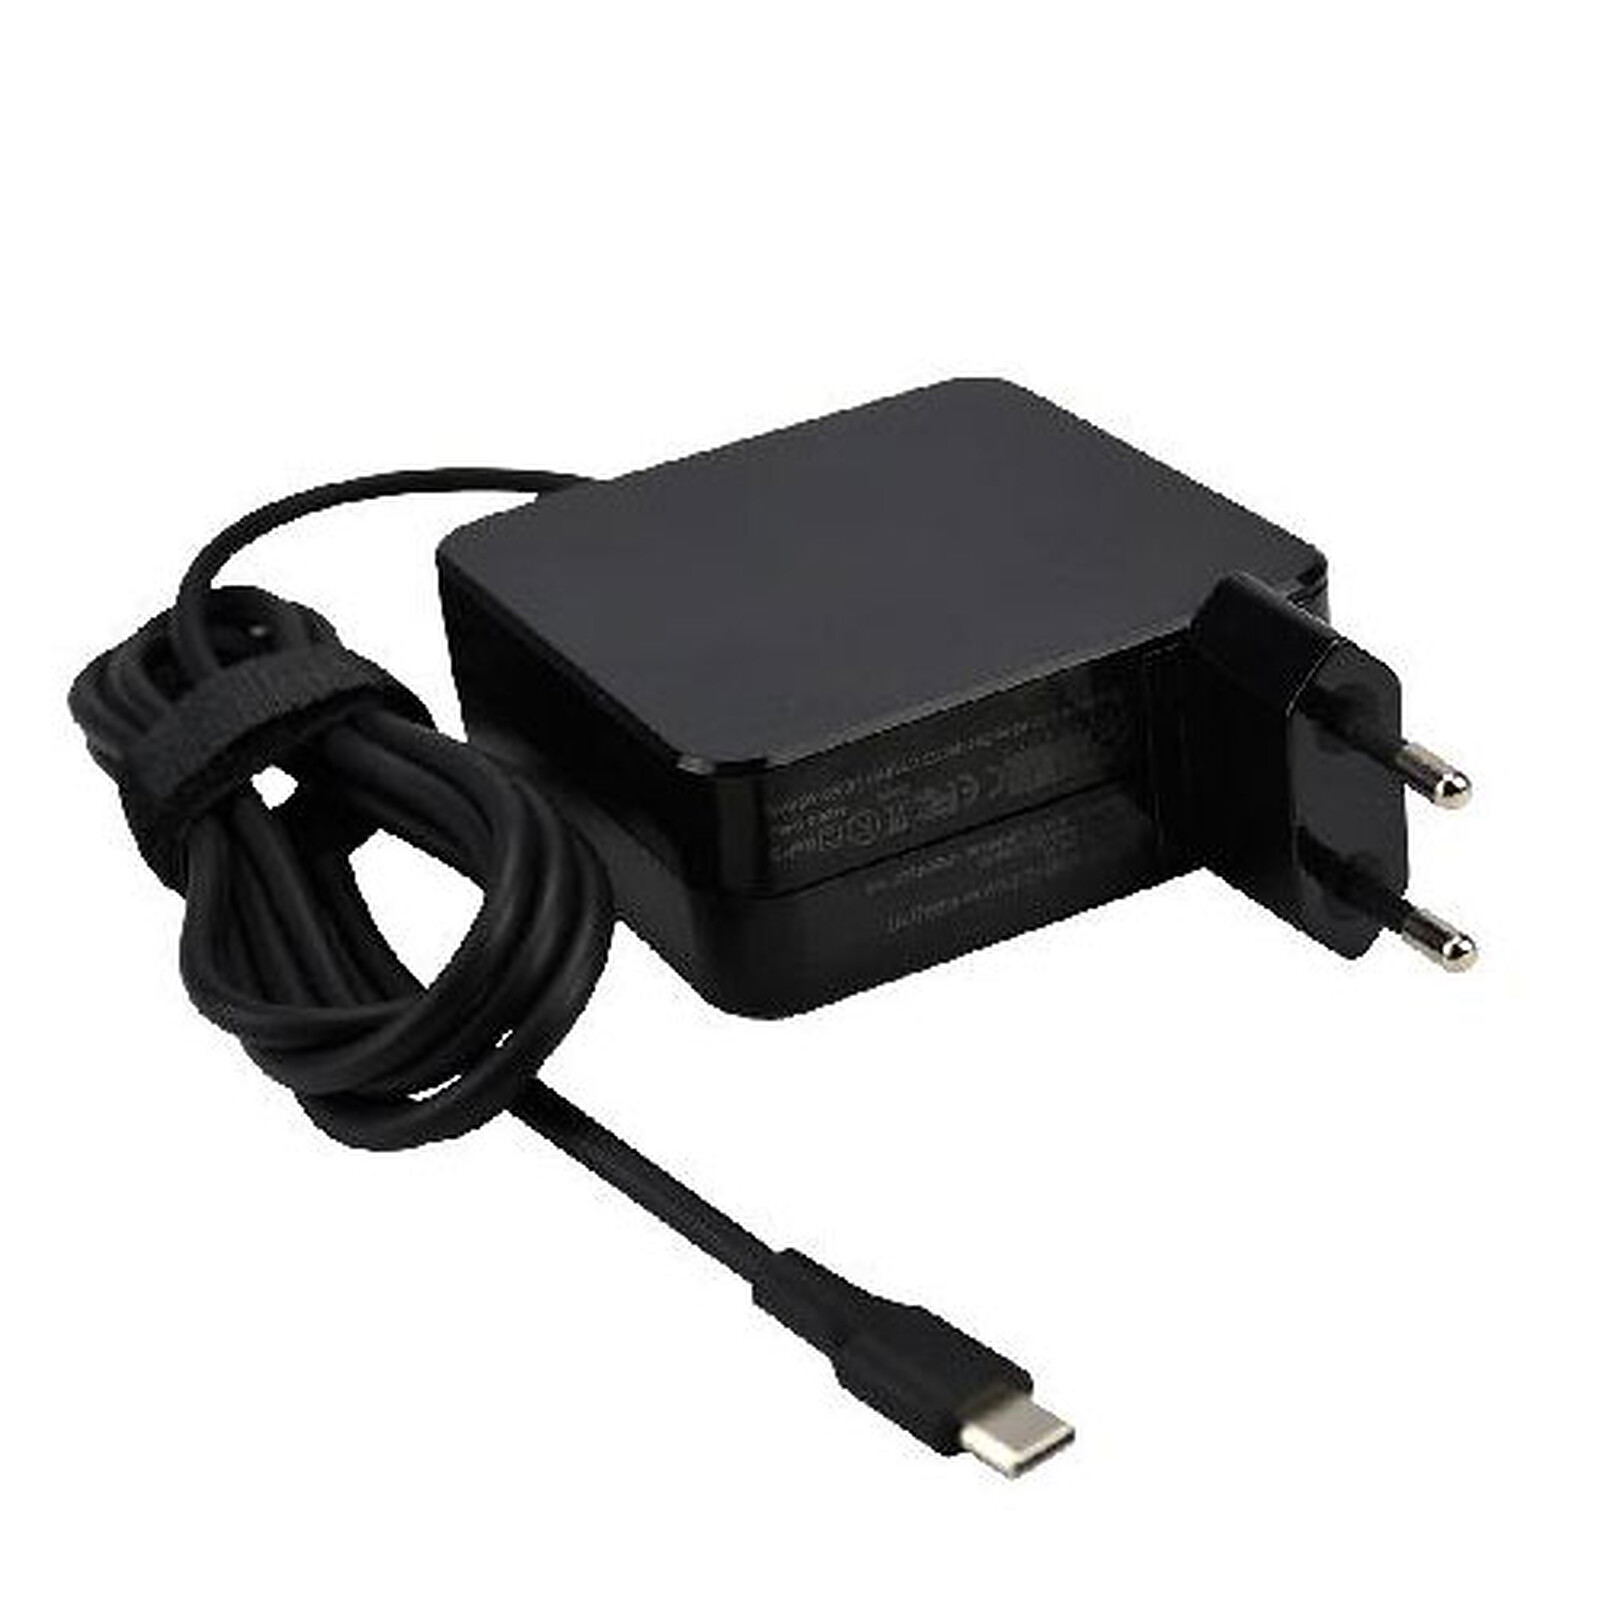 Chargeur USB C 65W, TAIFU DC 12V-24V Chargeur Allume Cigare DC